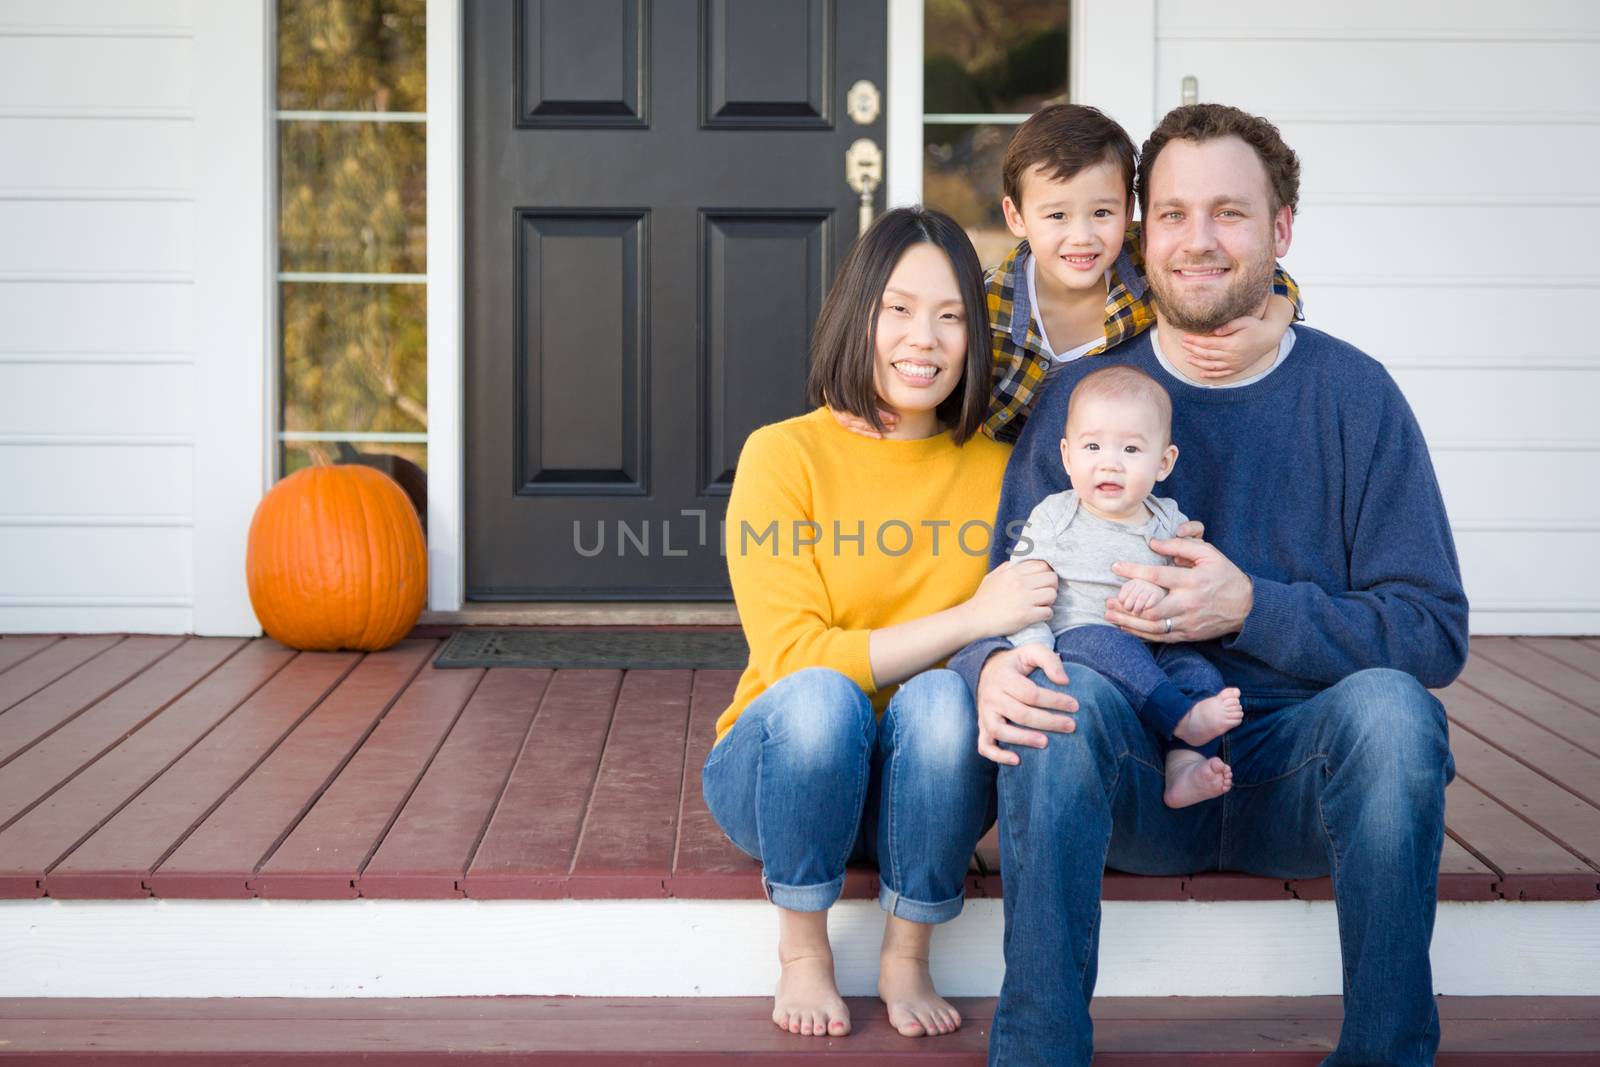 Young Mixed Race Chinese and Caucasian Family Portrait by Feverpitched